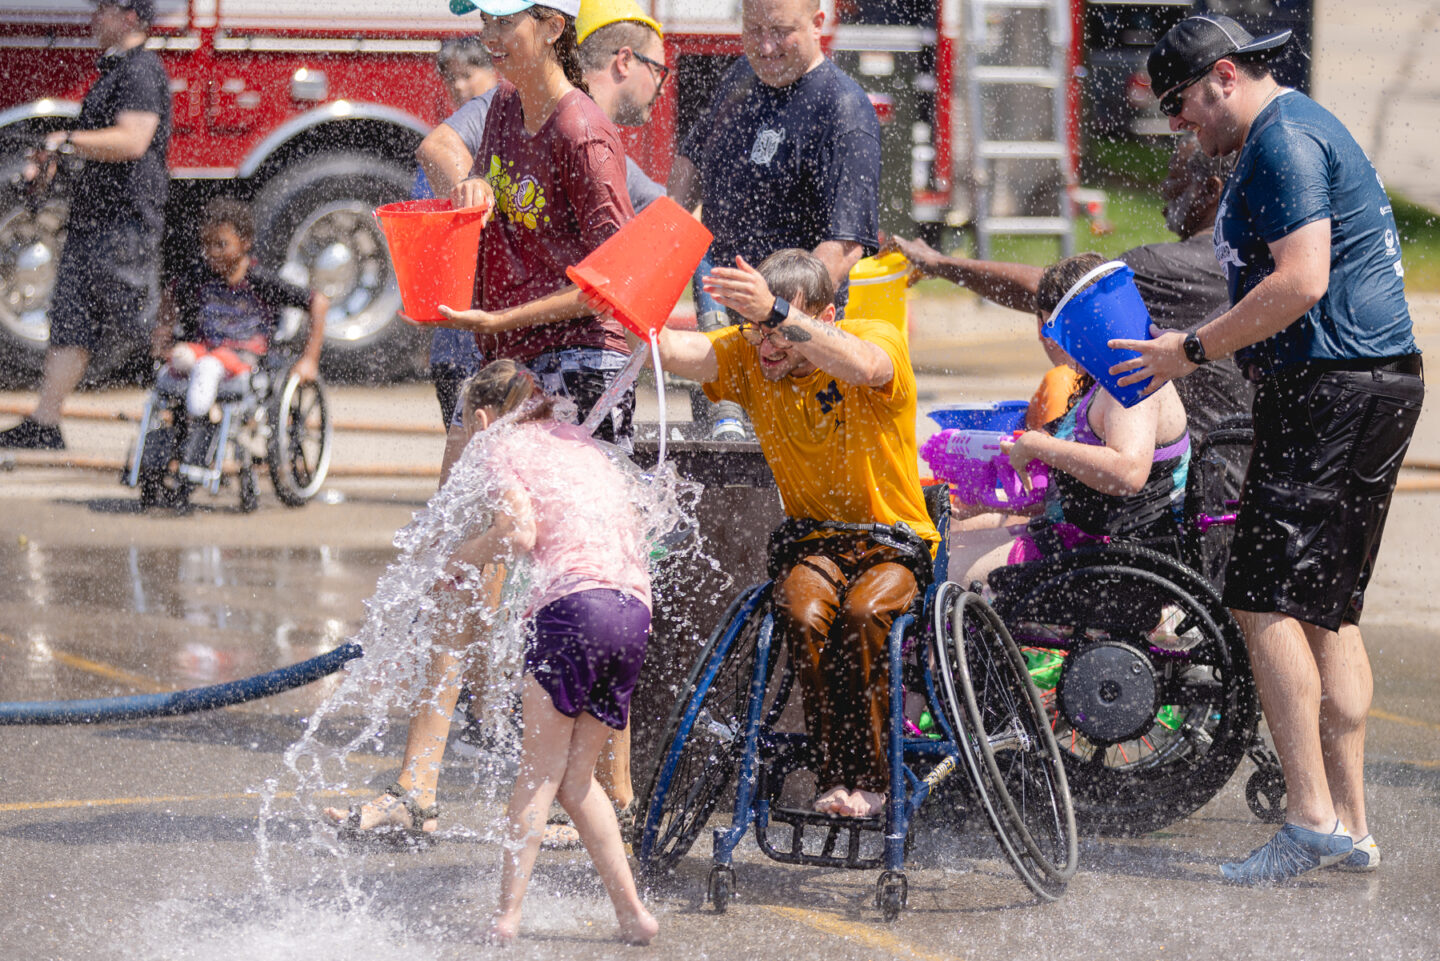 Campers enjoying a water fight with buckets and hoses with the Allendale Fire Department at Junior Wheelchair Sports Camp.